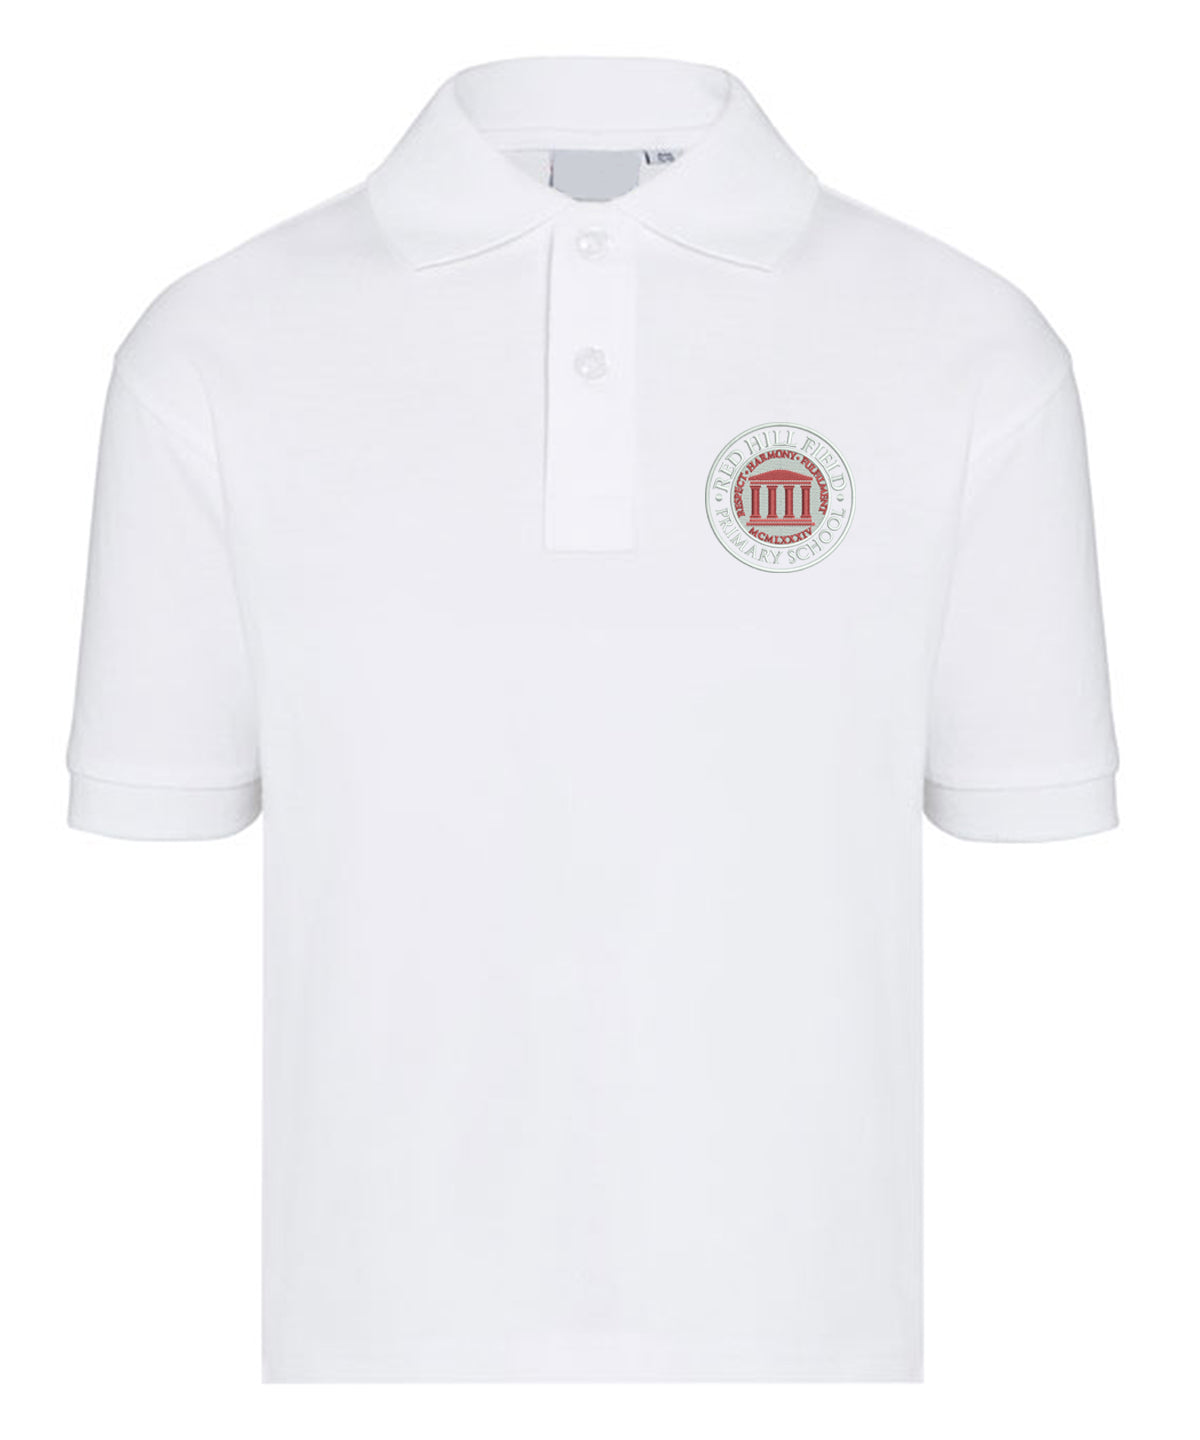 Red Hill Field Primary - White Polo Shirt - School Uniform Shop